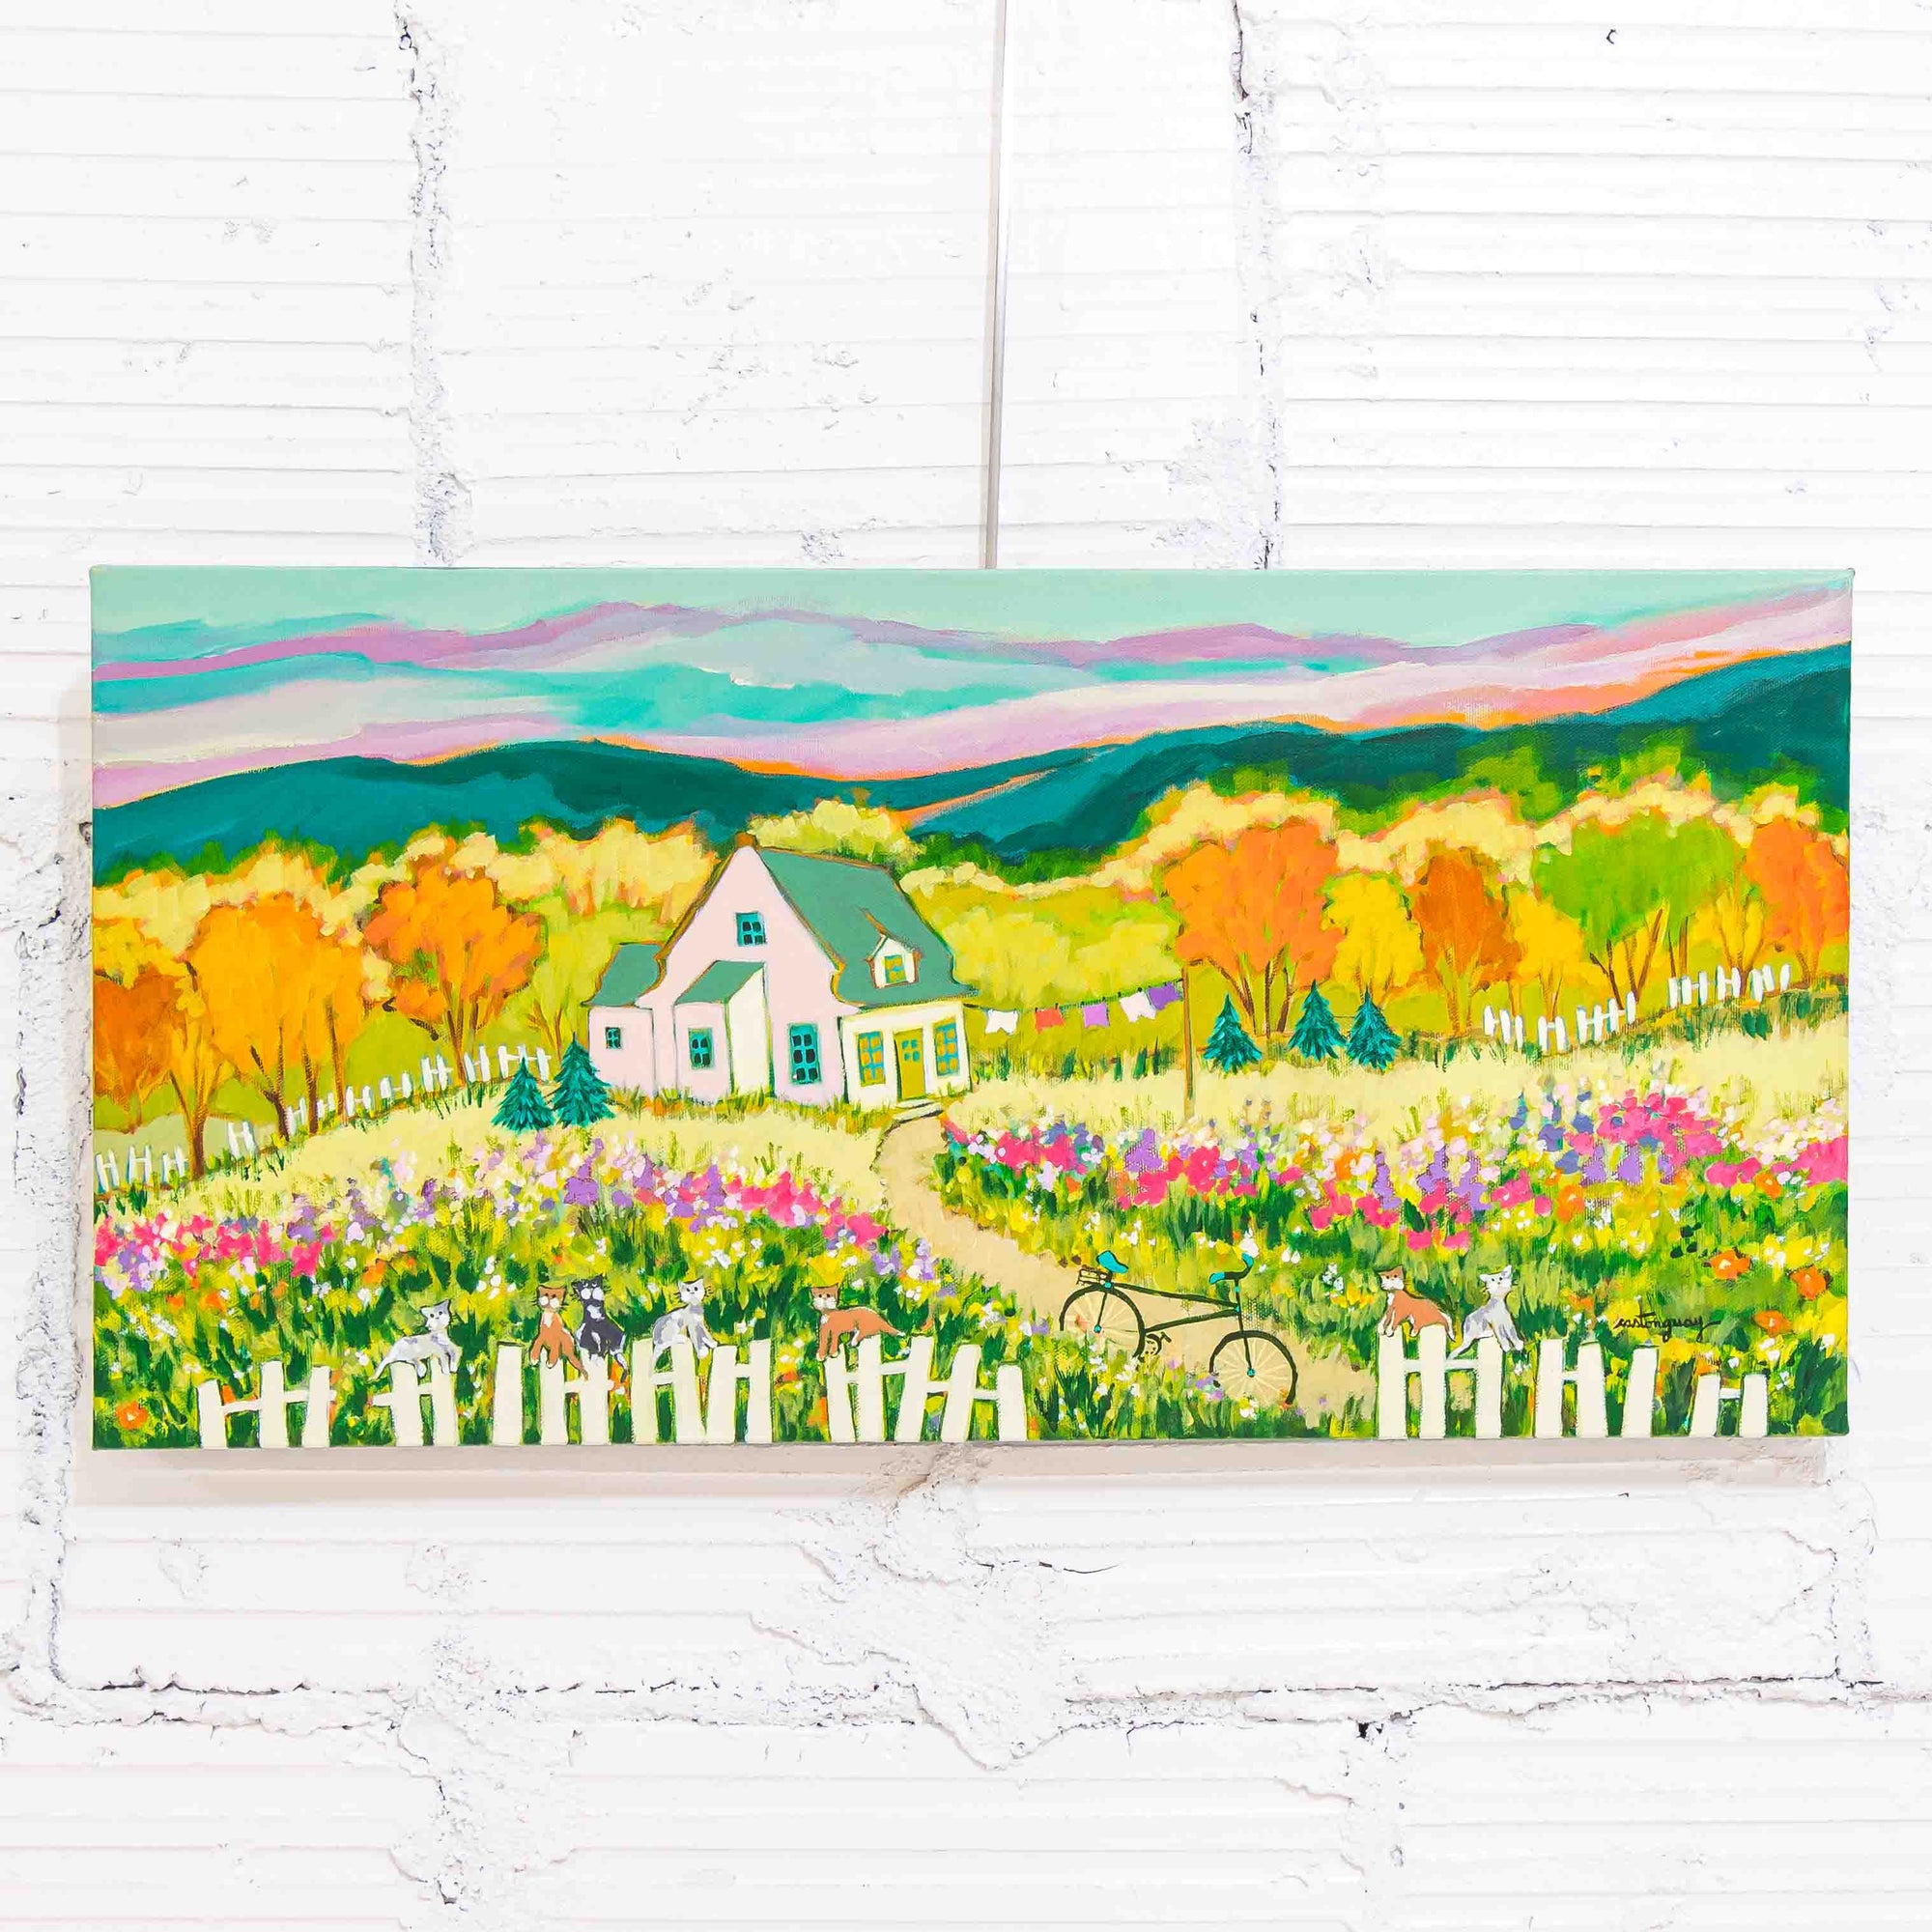 At the End of the Beautiful Day | 12" x 24" Acrylic on Canvas Claudette Castonguay